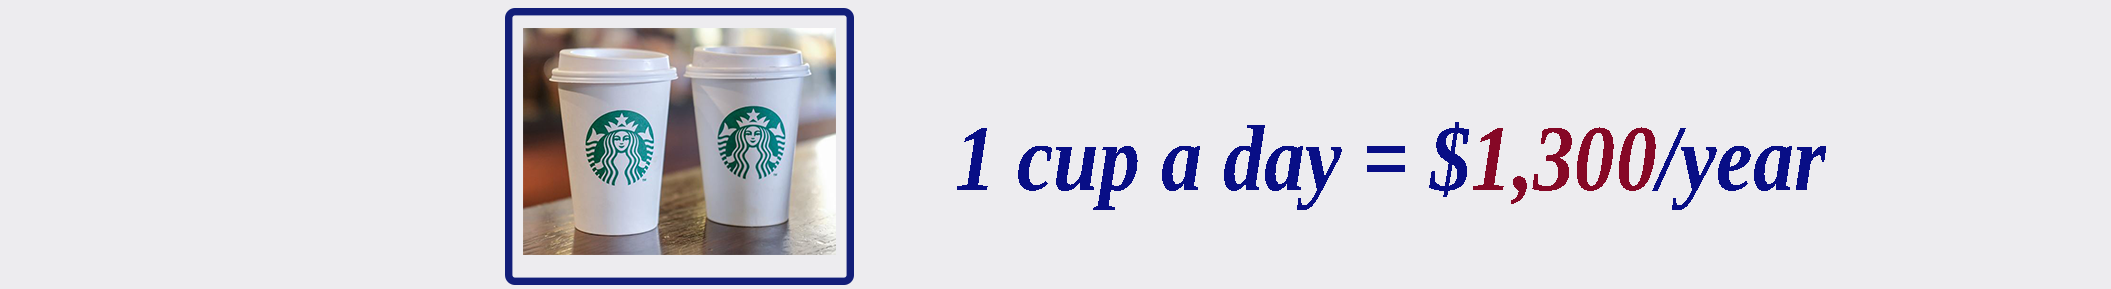 coffee6.png